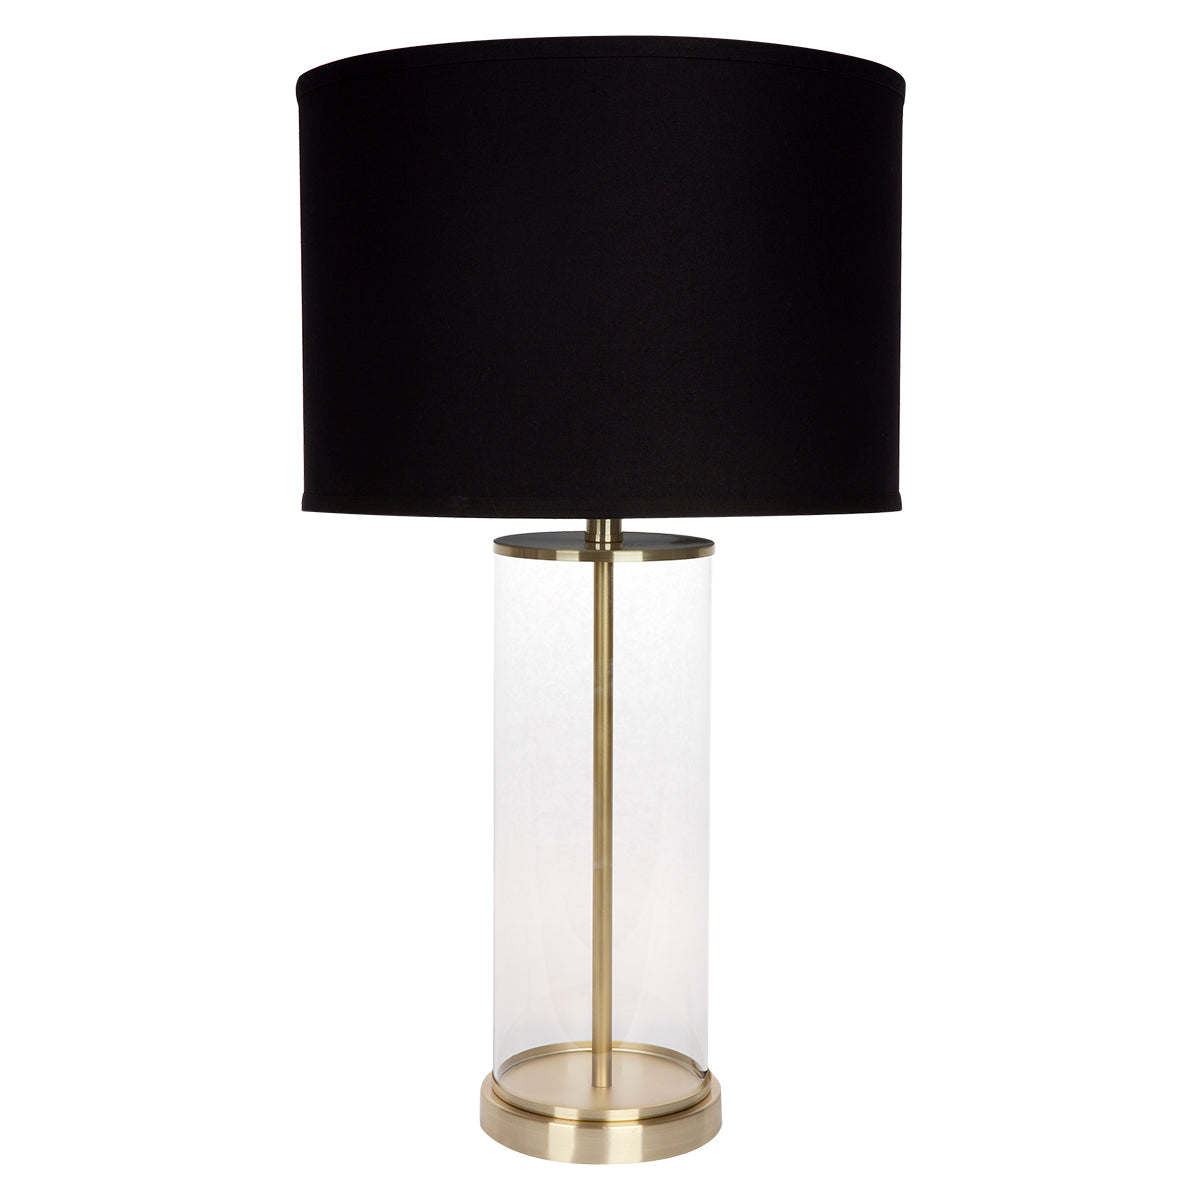 Left Bank Table Lamp - Brass w Black Shade